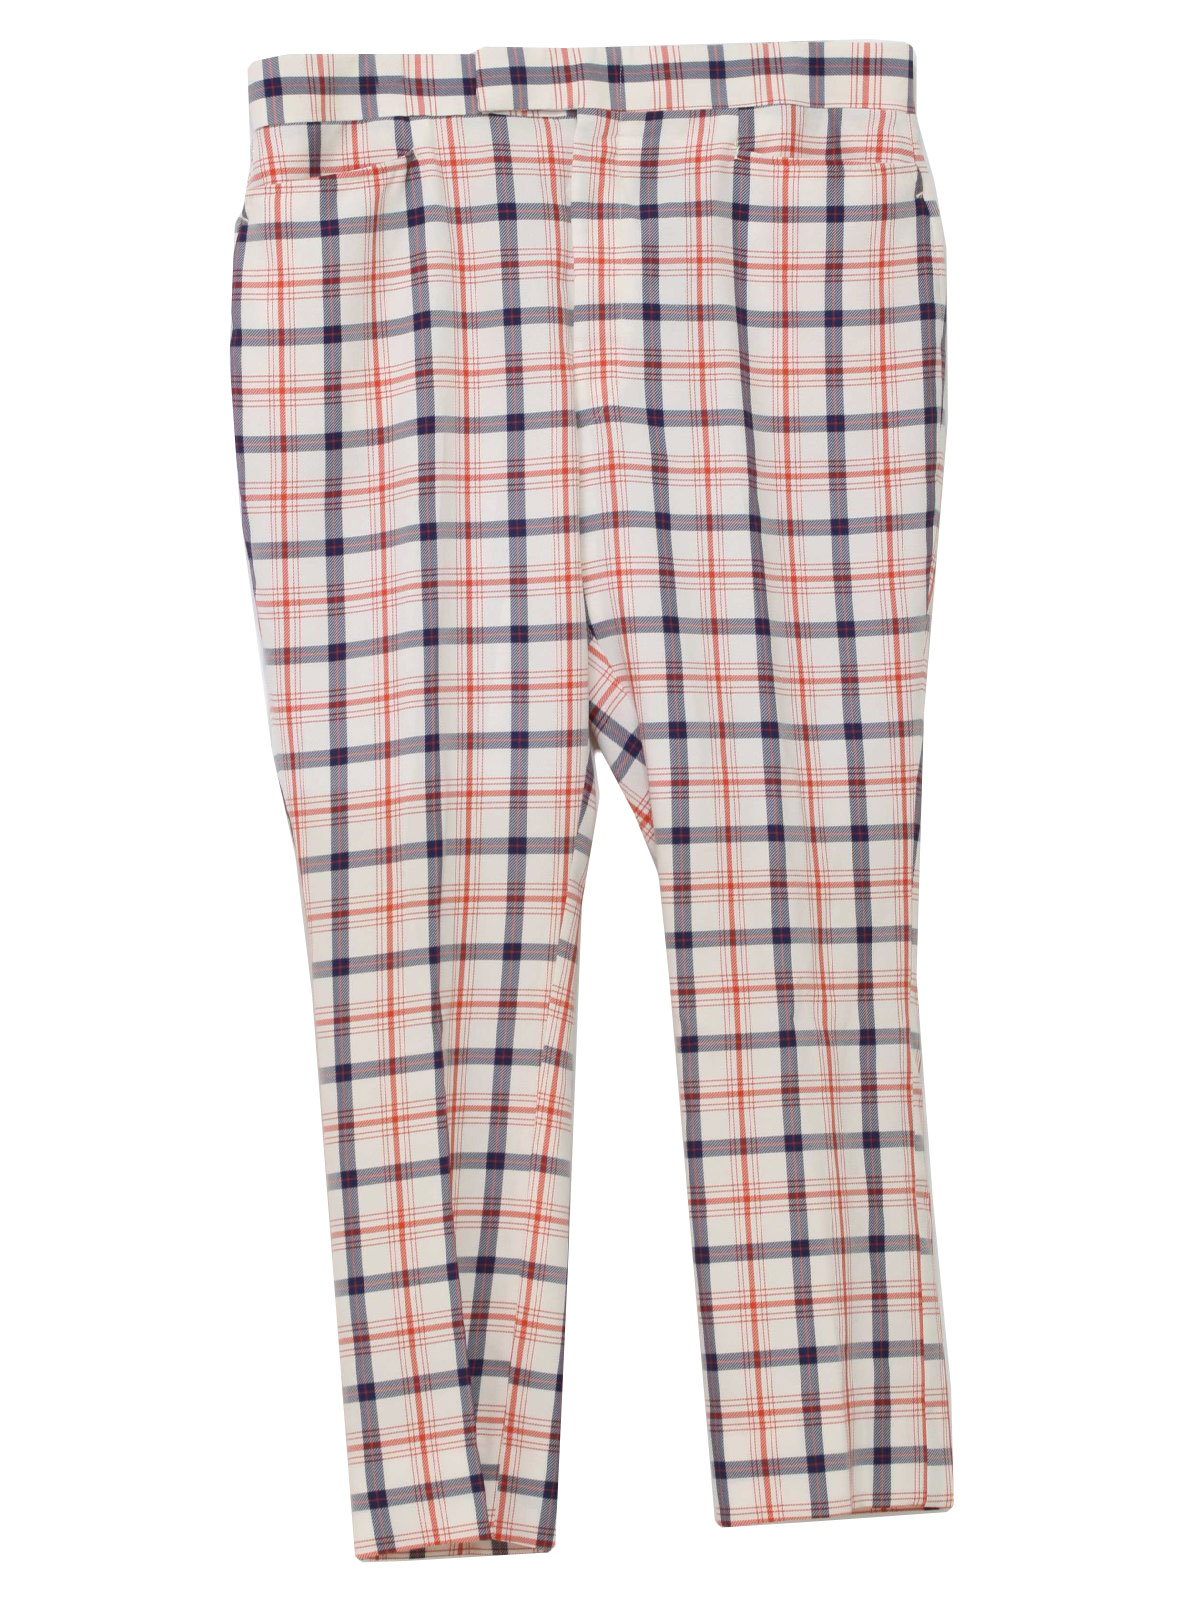 red white and blue plaid pants